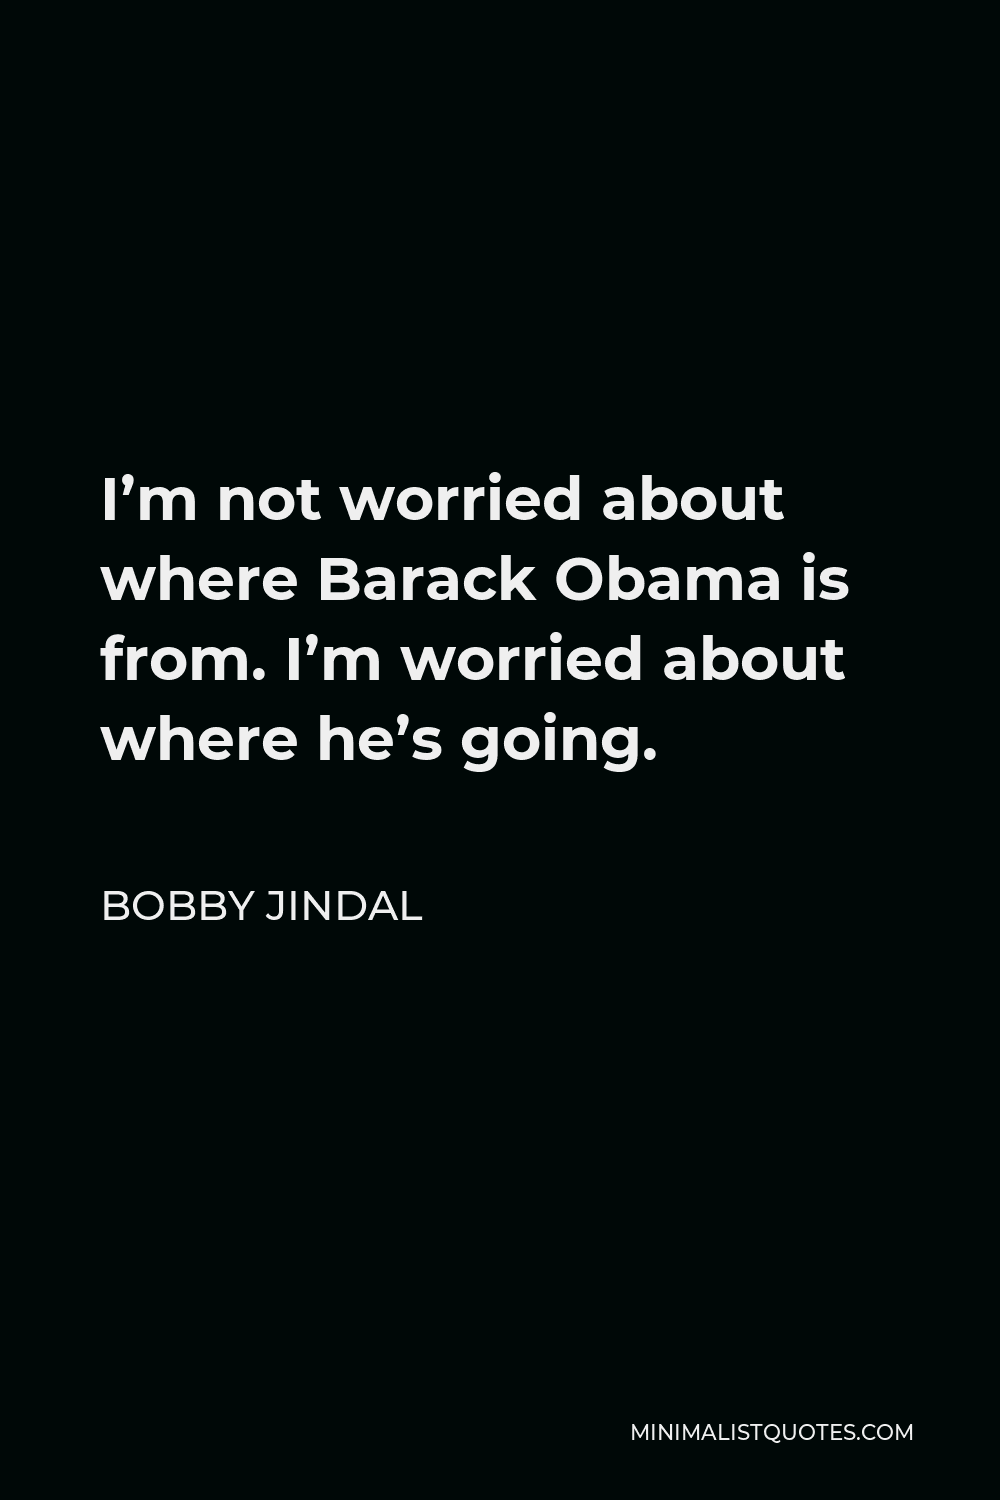 Bobby Jindal Quote - I’m not worried about where Barack Obama is from. I’m worried about where he’s going.